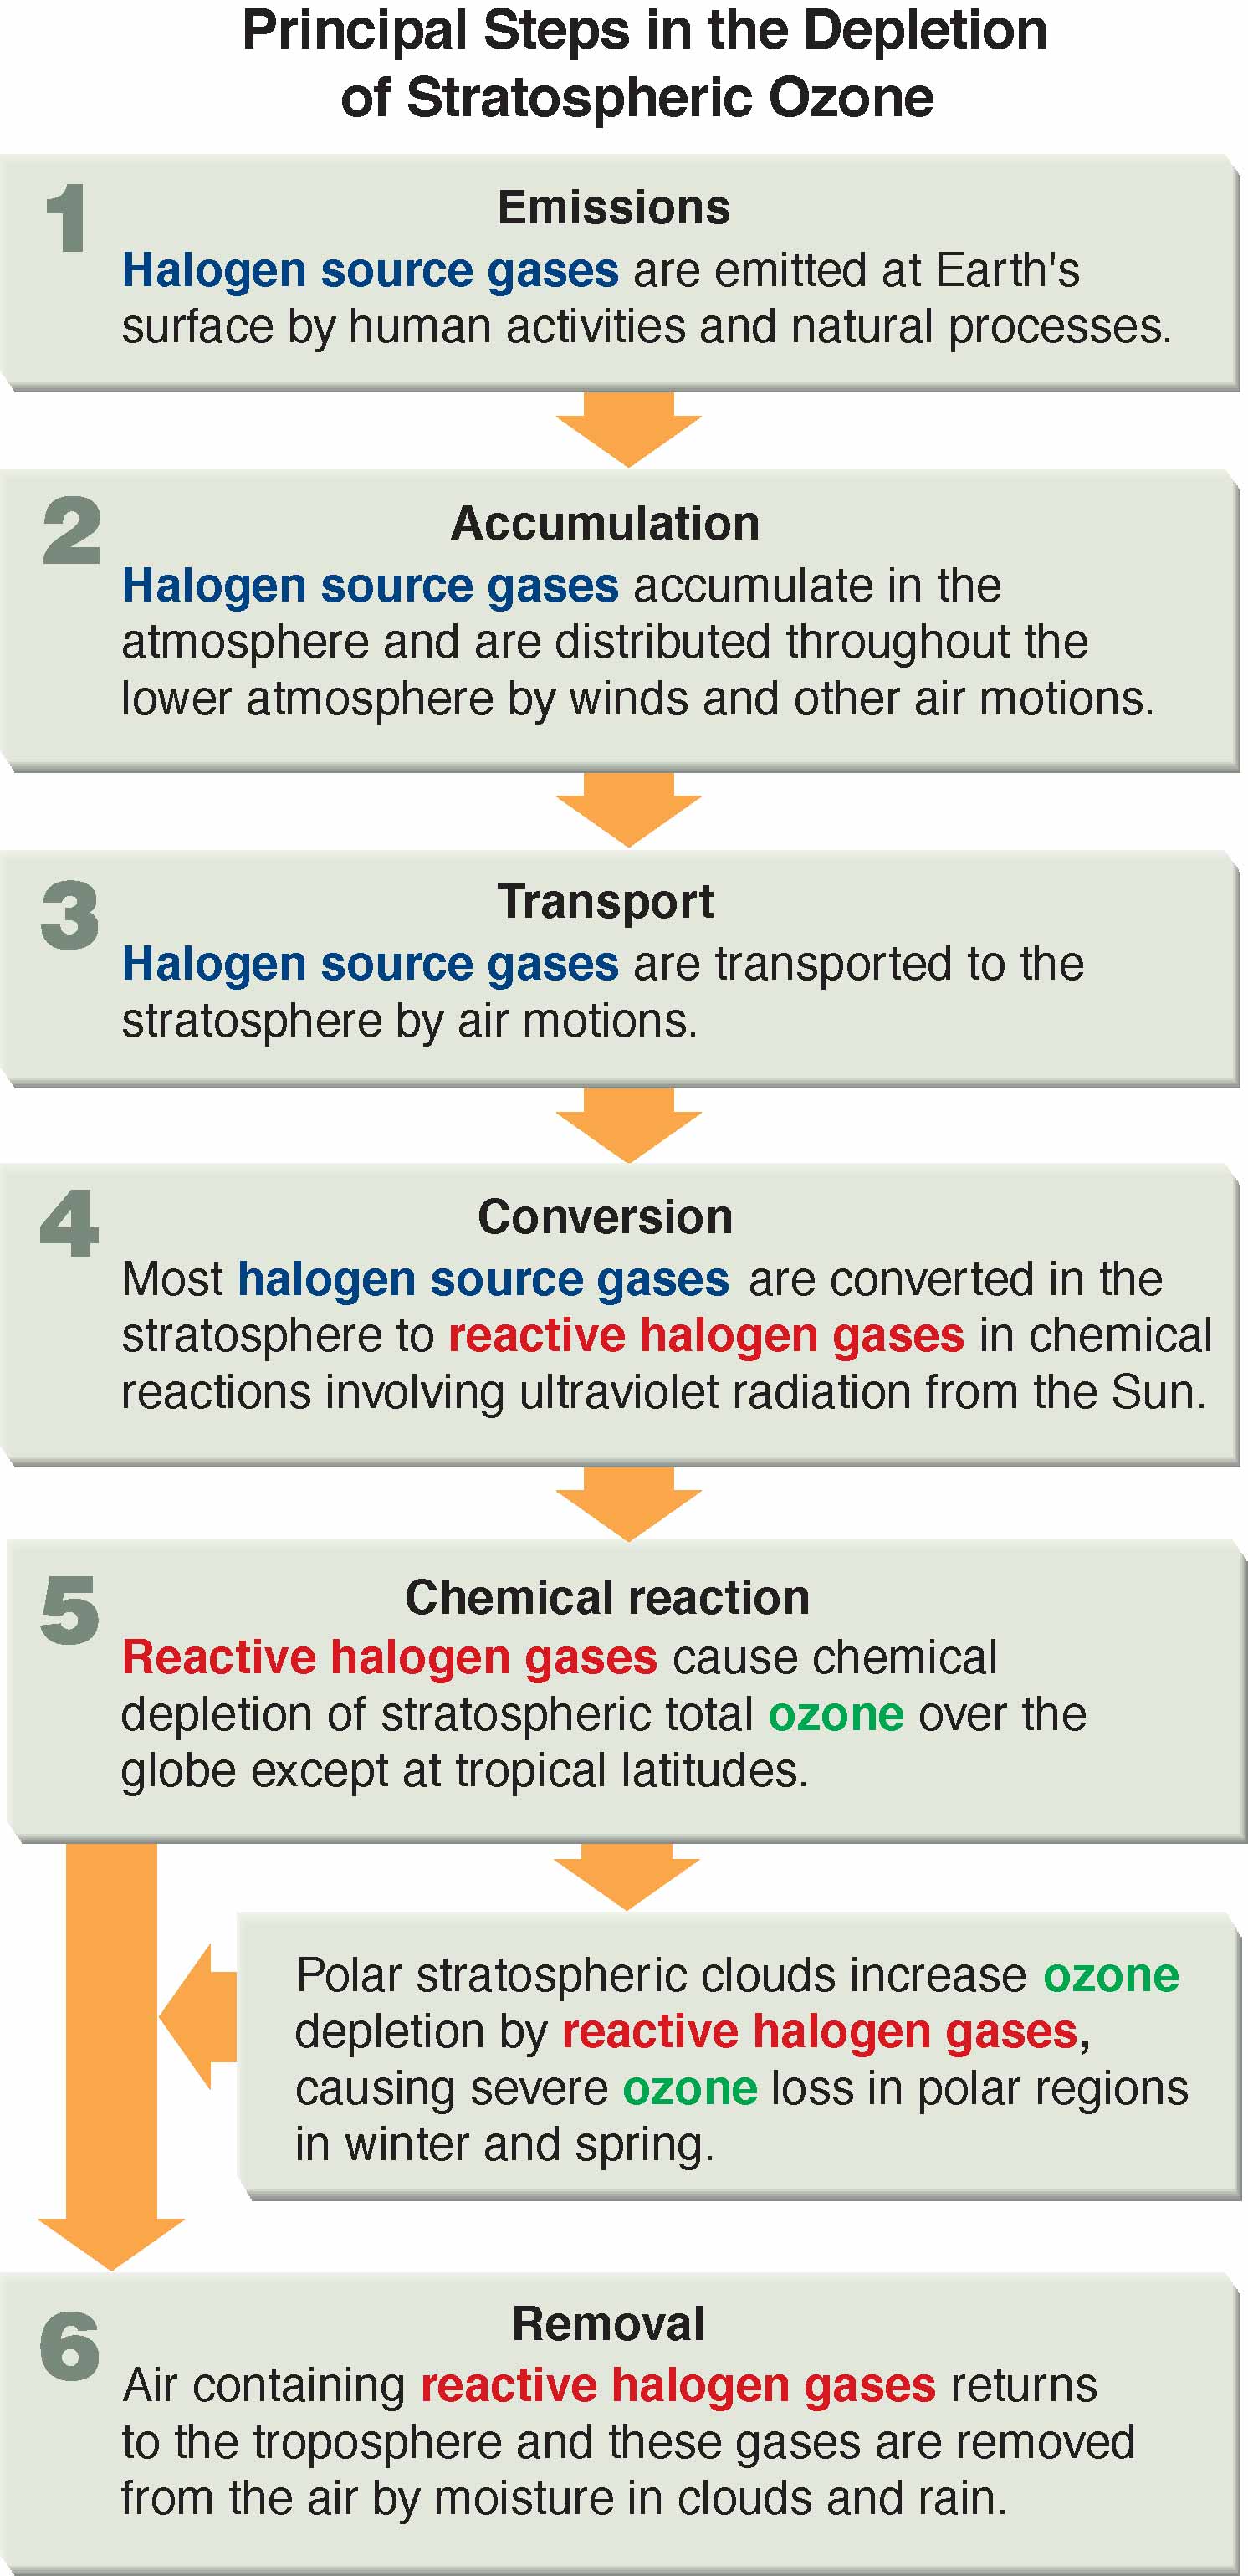 Scientific Assessment of Ozone Depletion 2006 - Twenty Questions and